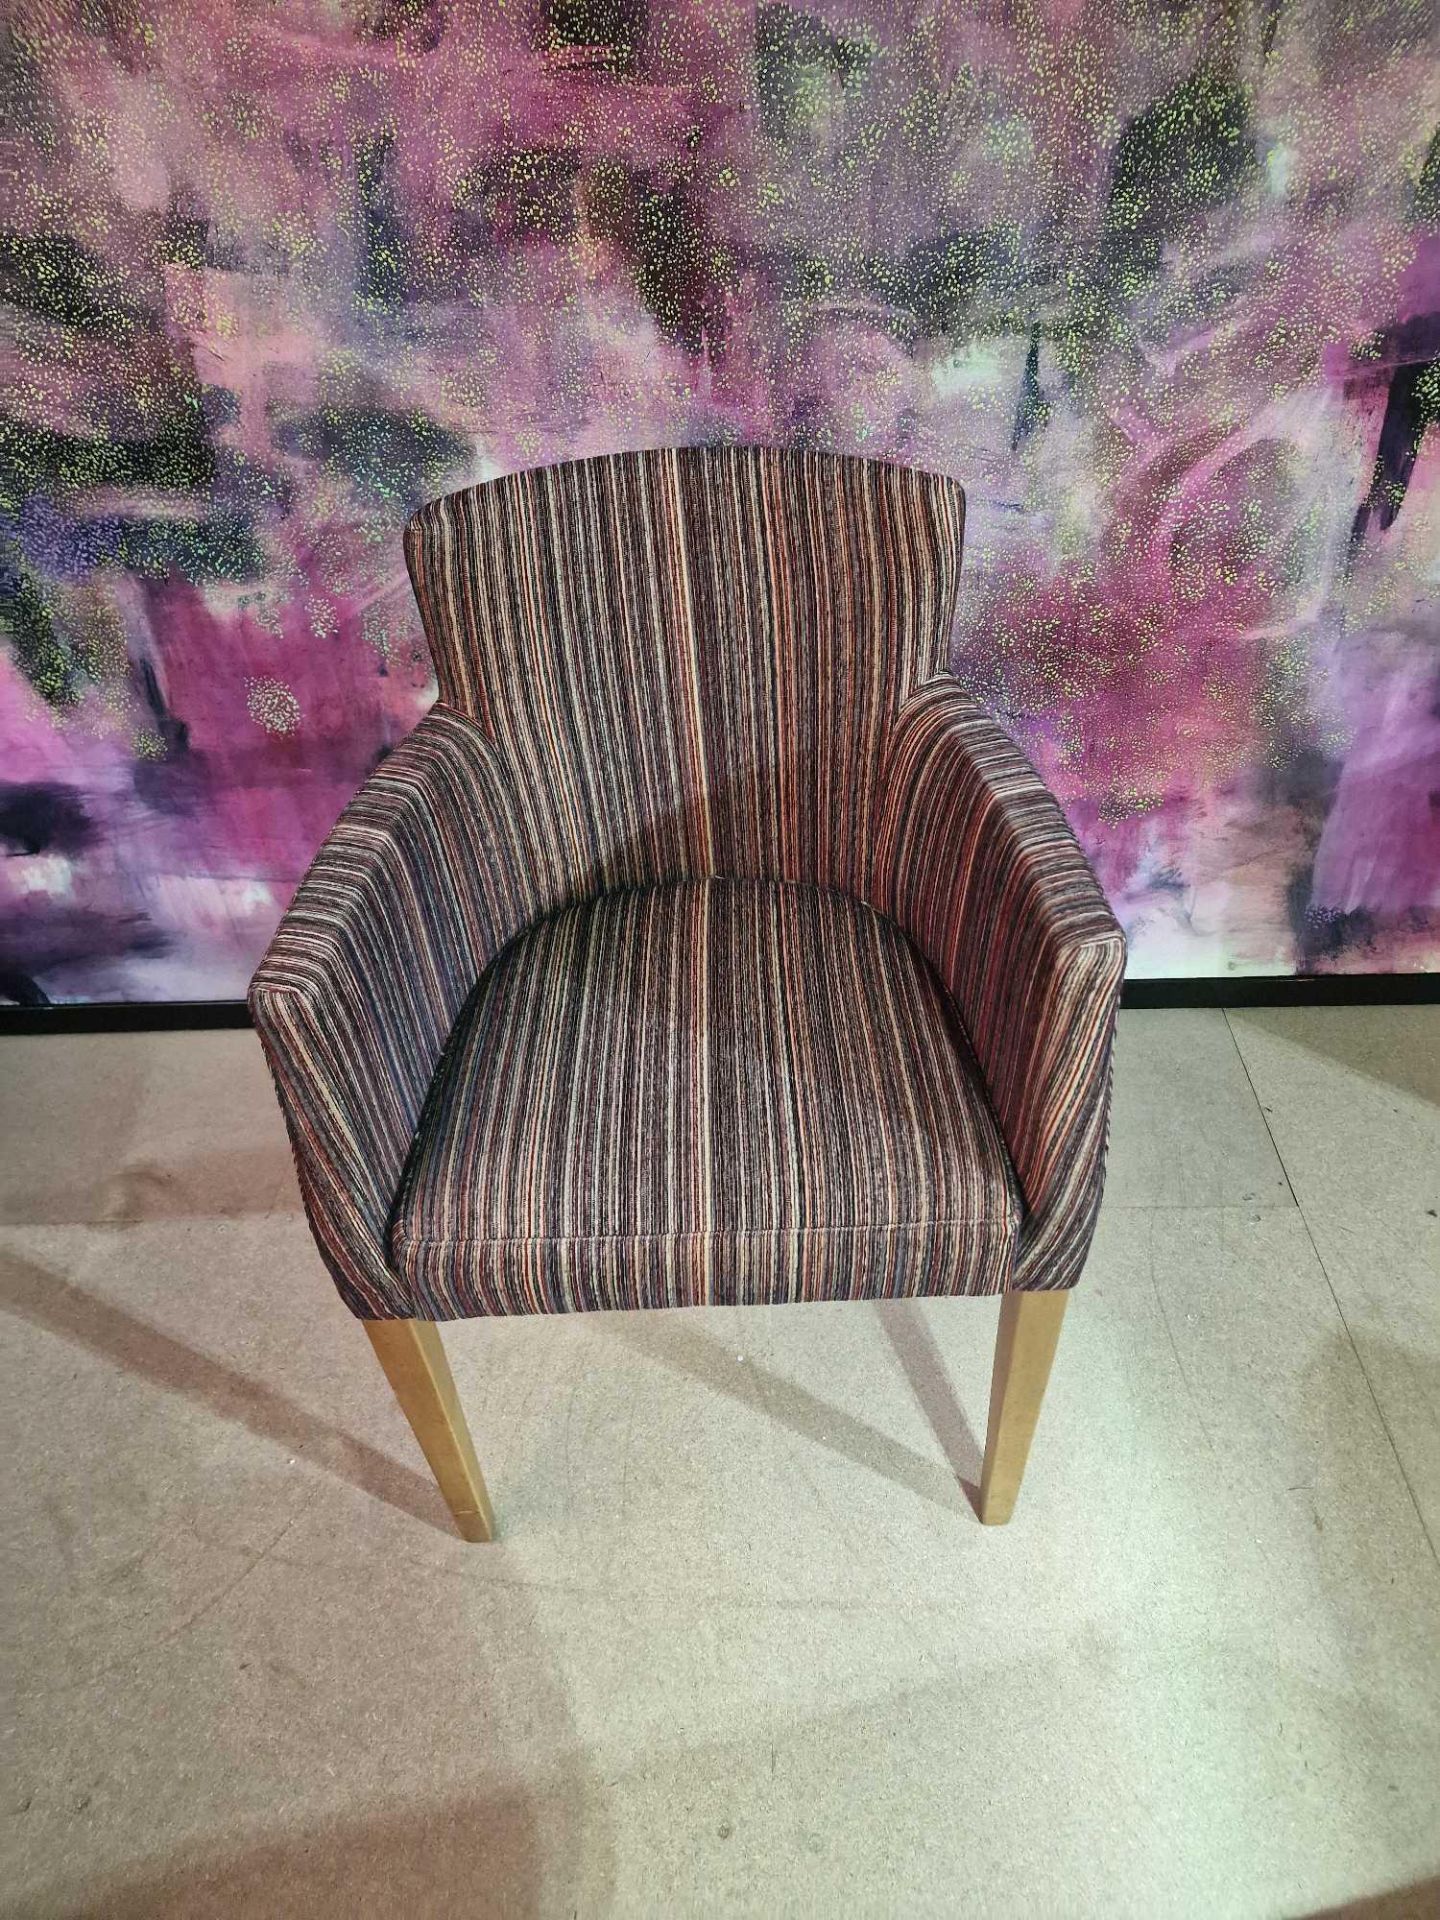 Contemporary dining chair Upholstered in a modern striped pattern fabric, the high arm rests and